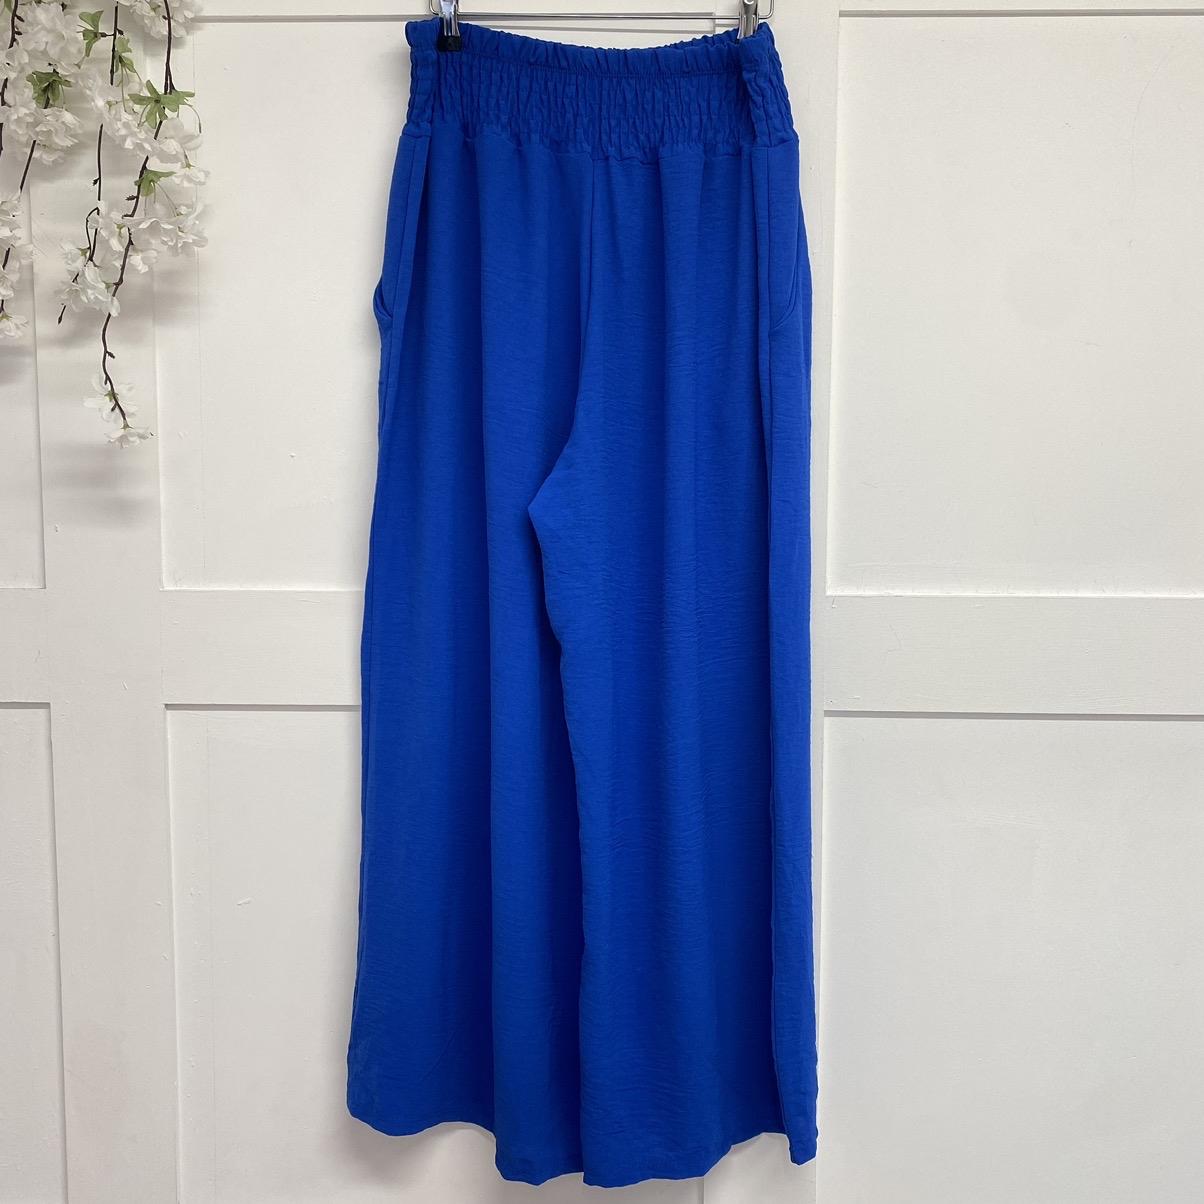 Devon: Lightweight wide leg trousers with pockets. One size: 14-22